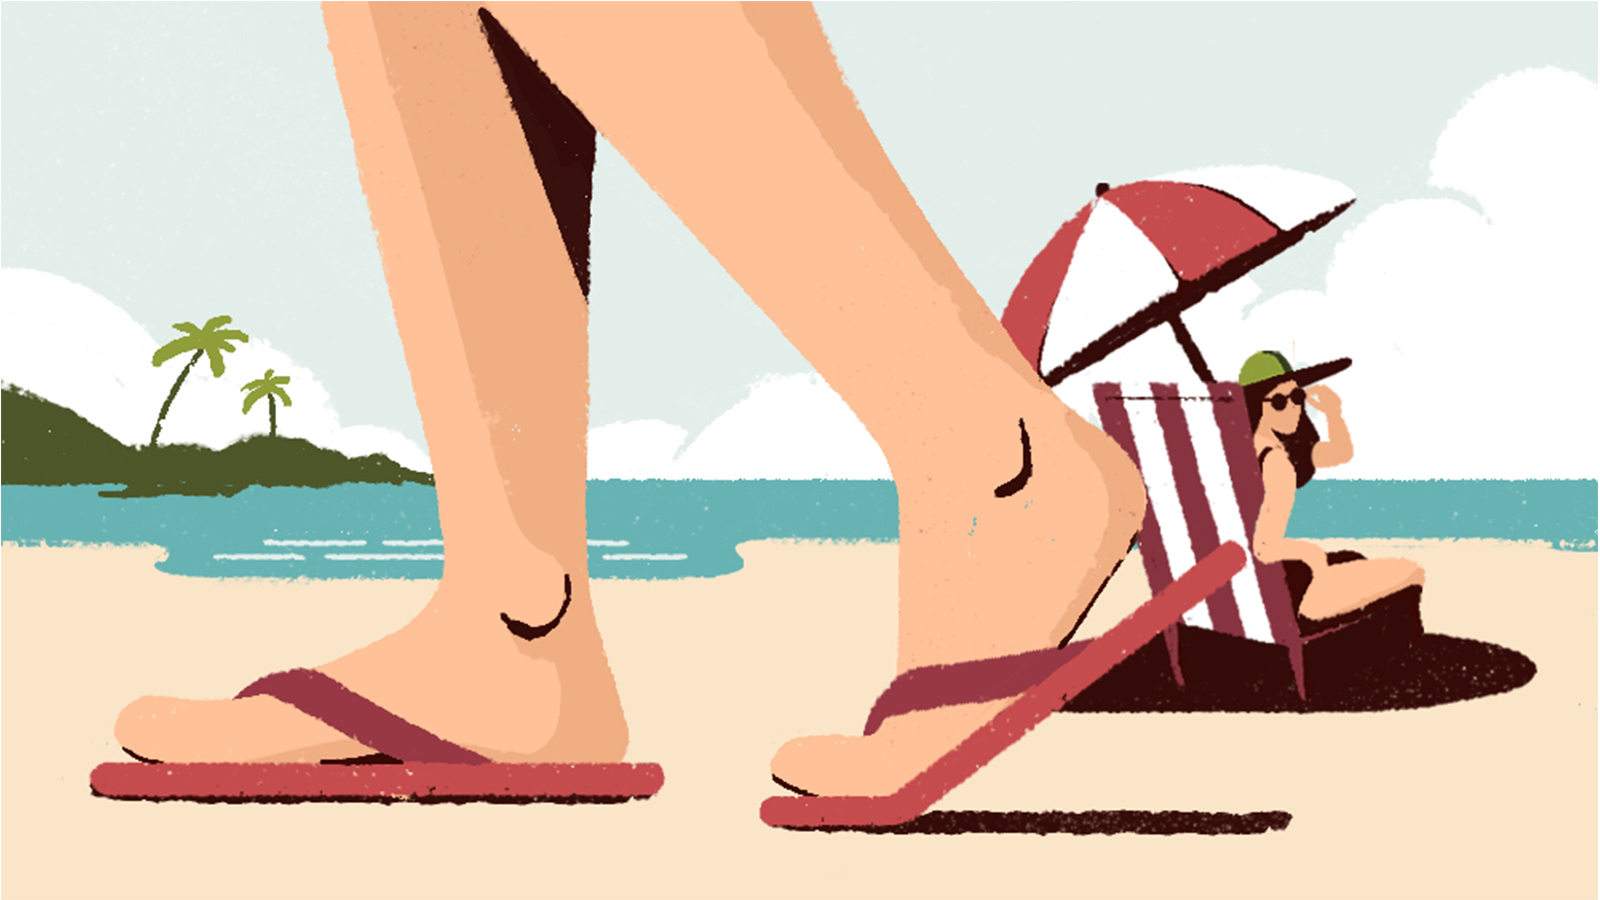 How to make flip flops work this summer